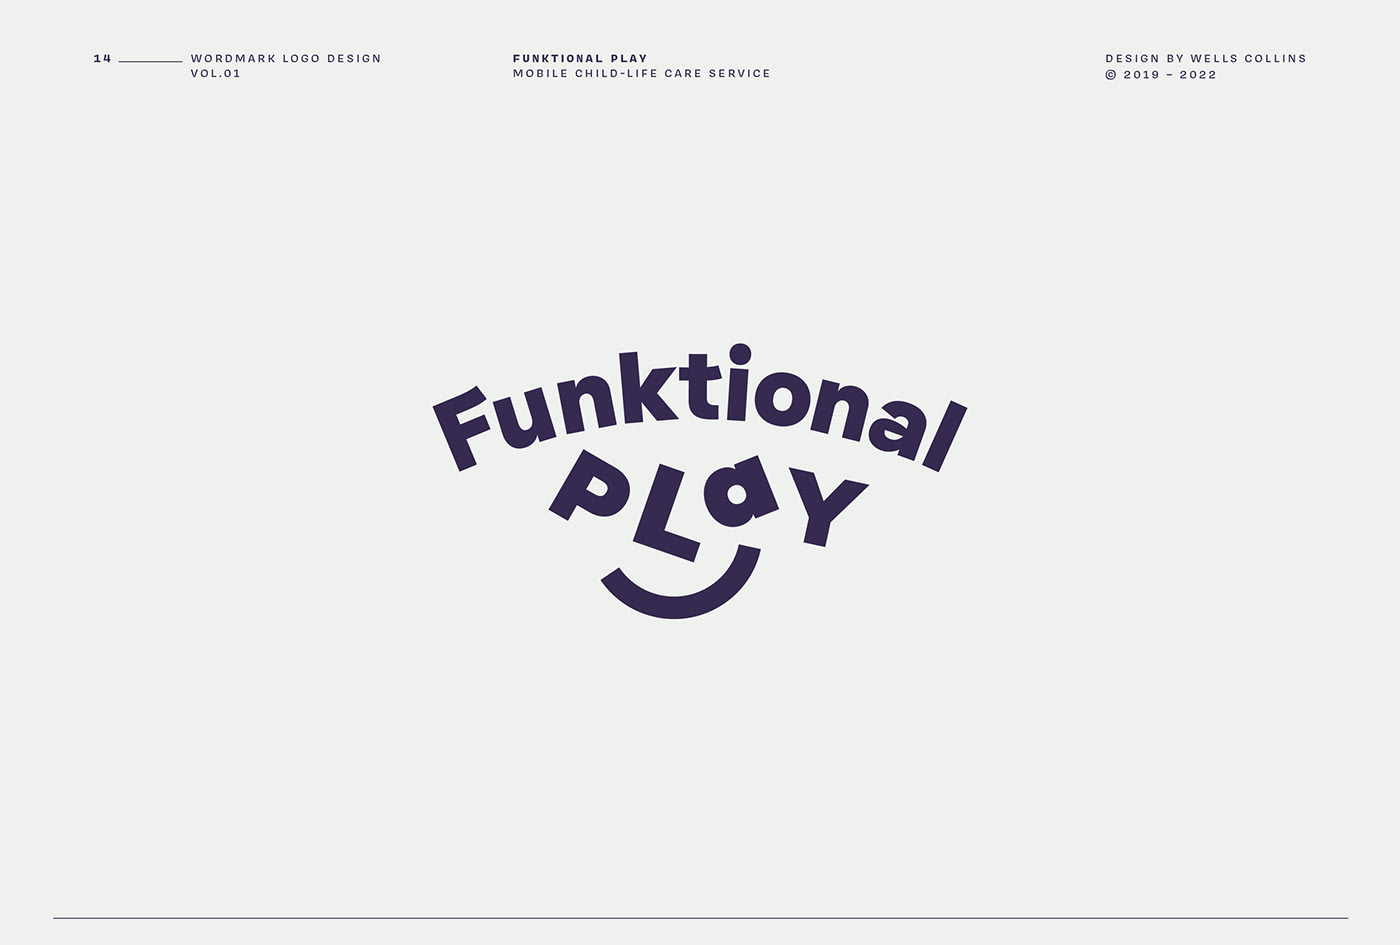 Playful logotype with smiling face for Funktional Play - child-life care services